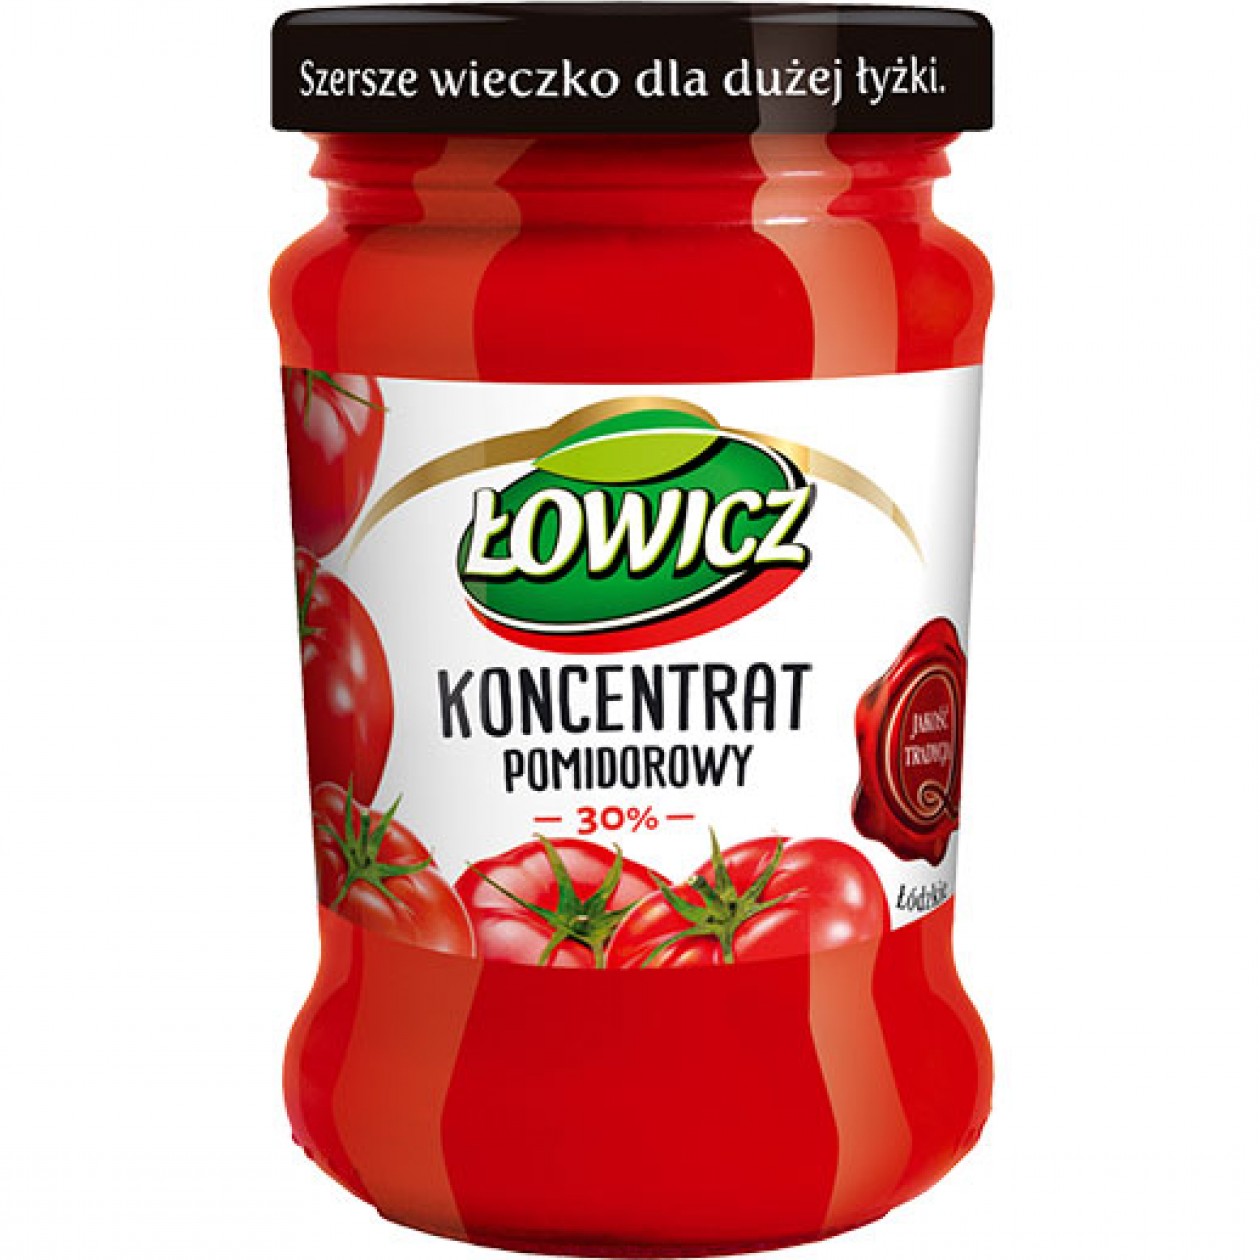 Lowicz Tomato Concentrate 30% 12x190g